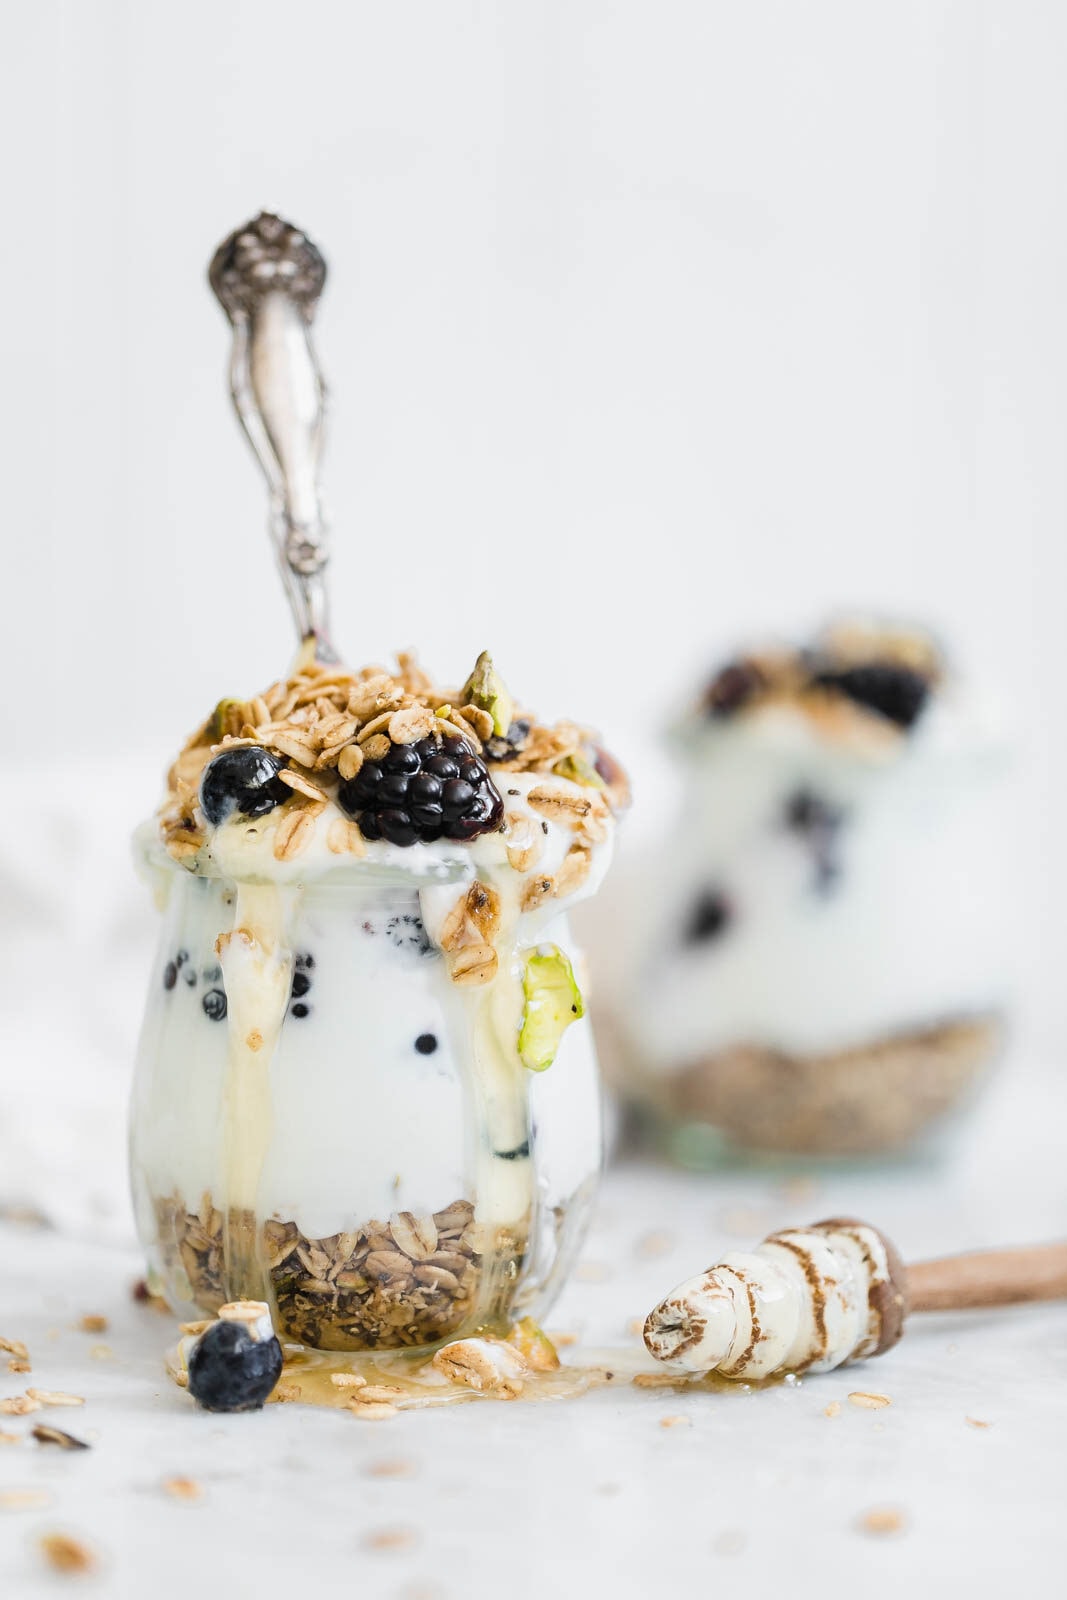 A chai-spiced Cardamom Granola Parfait made with the most addicting Cardamom Granola, and topped with blackberries and honey.